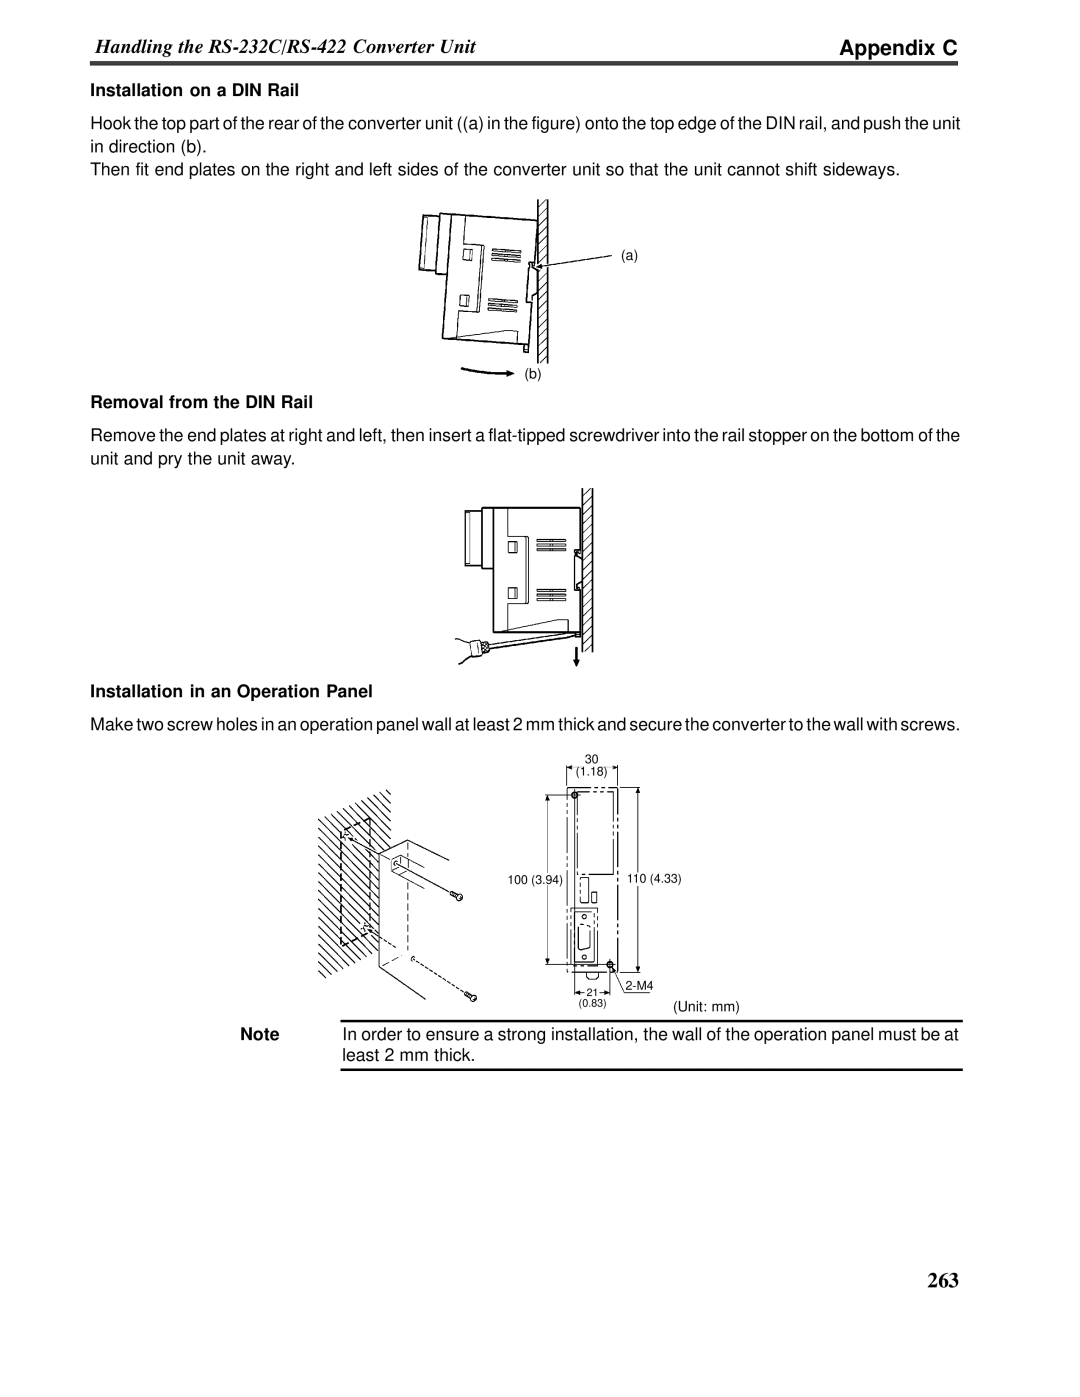 Omron V022-E3-1 operation manual #0!891, Appendix C, Installation on a DIN Rail, Removal from the DIN Rail 